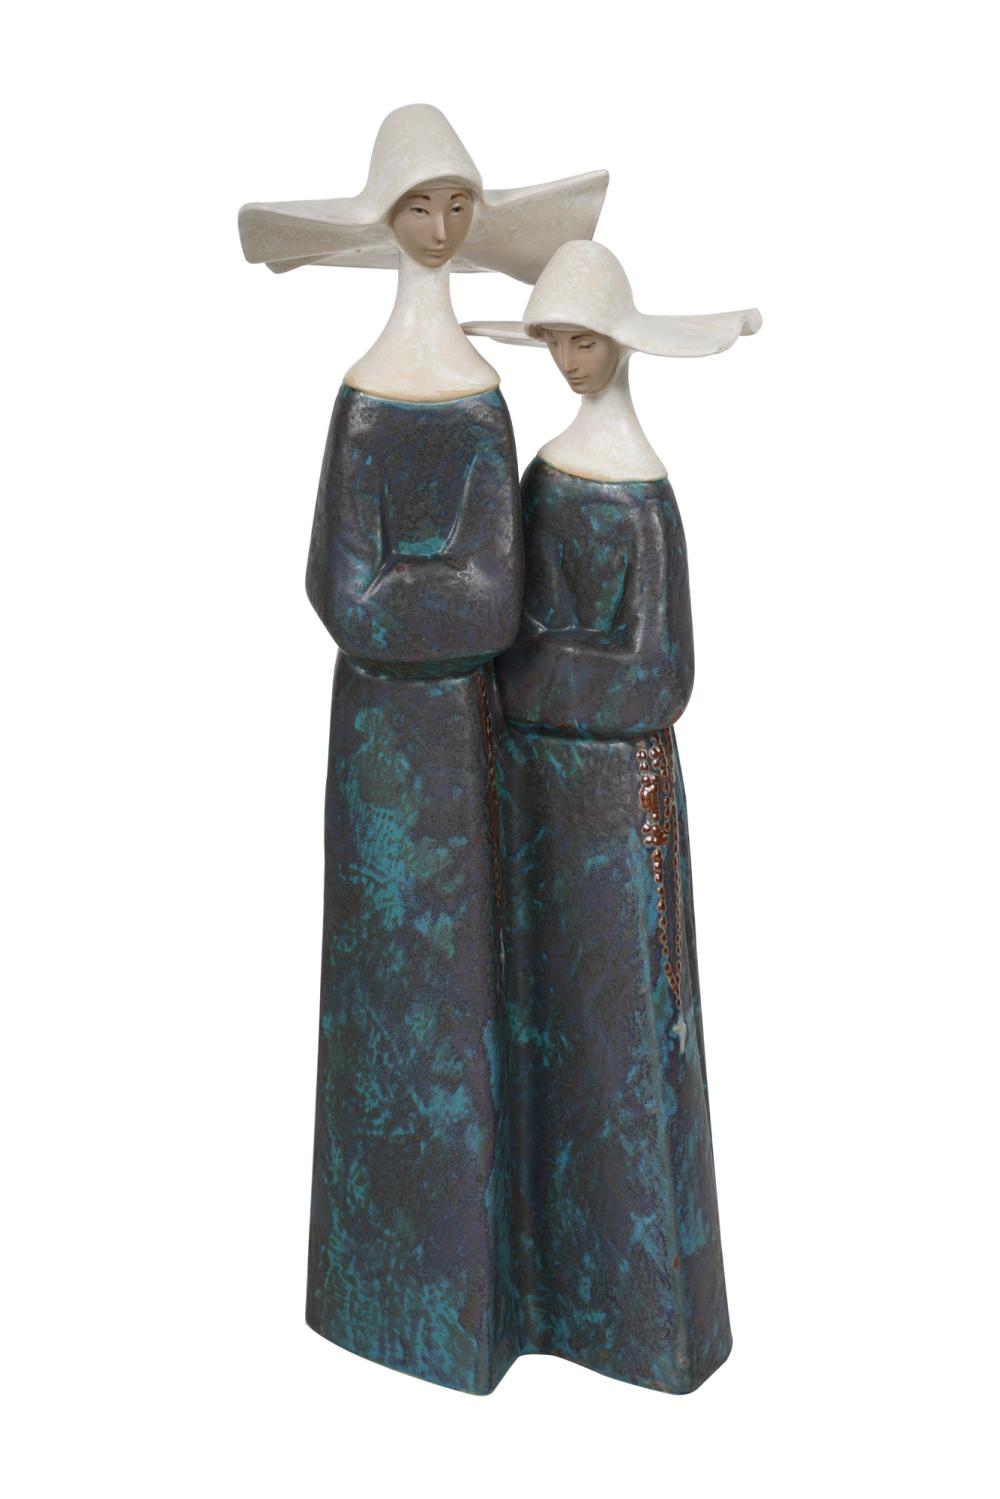 LLADRO FIGURE OF TWO NUNS13 1/2 inches